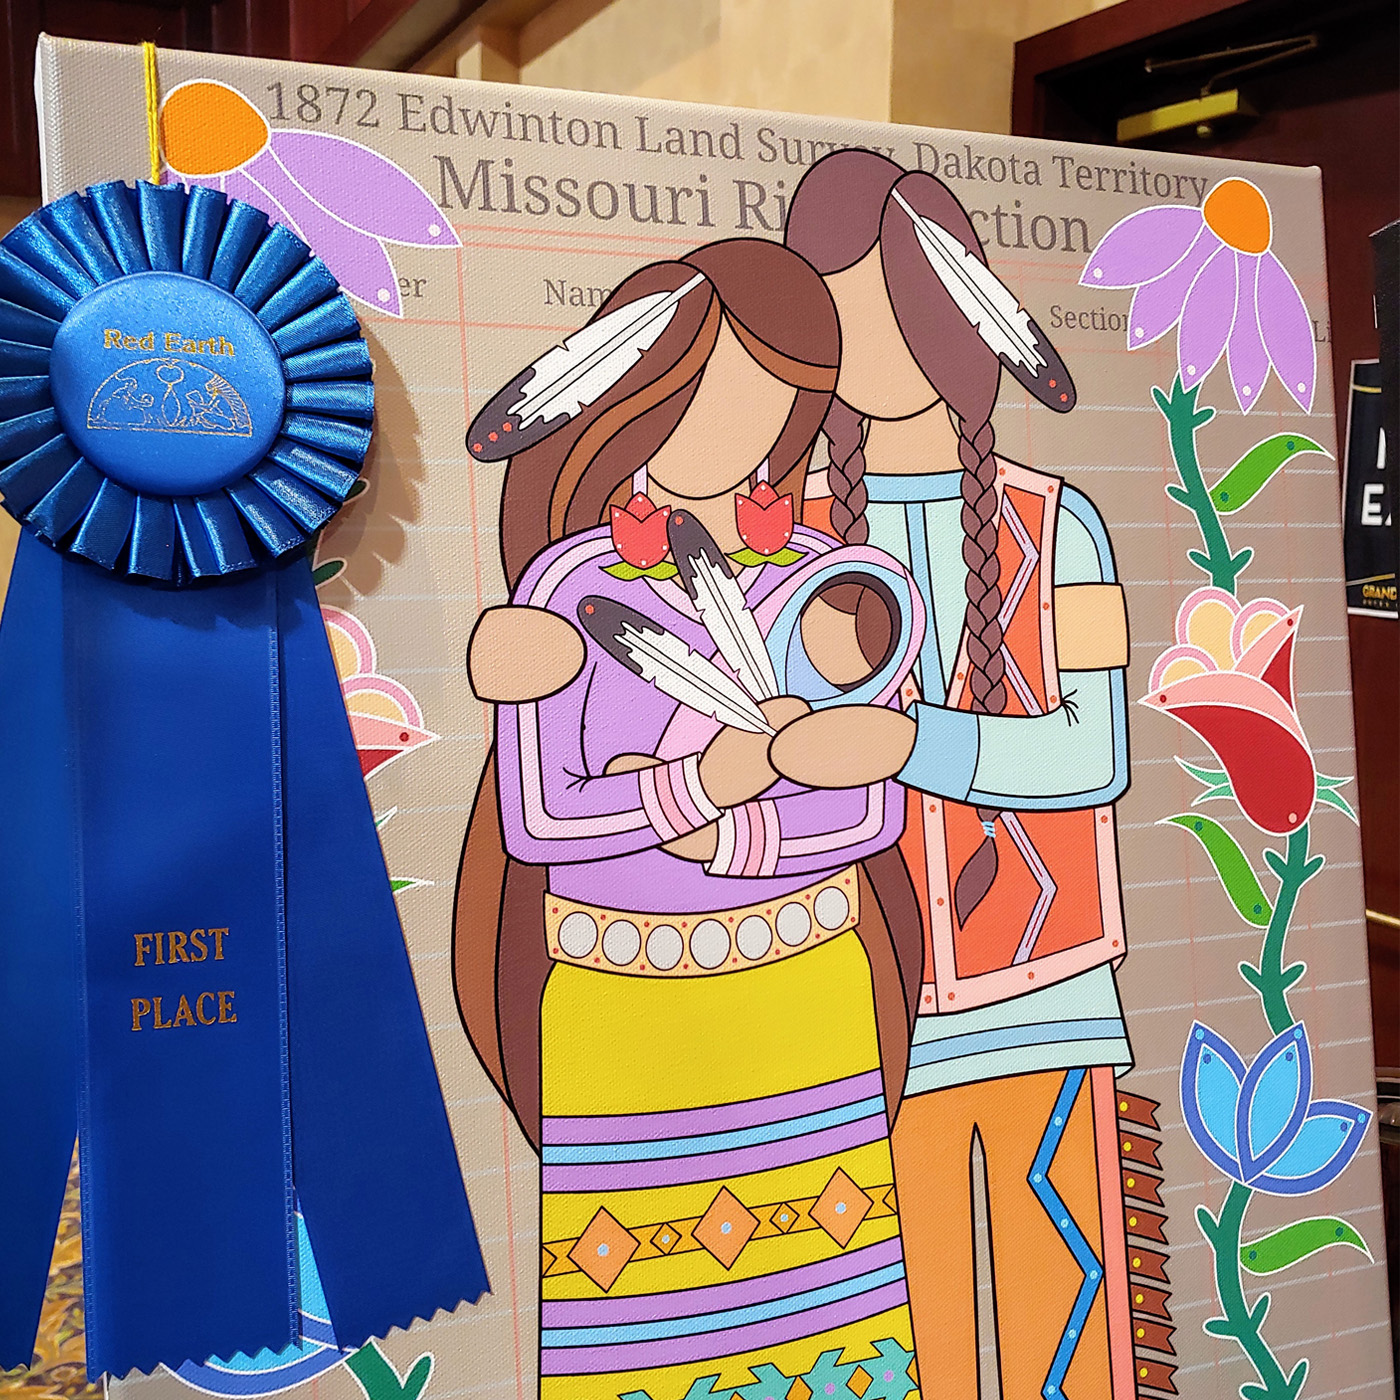 A photograph of Bill Brien’s first place winning canvas art that depicts an indigenous couple standing together while embracing their small baby who is wrapped snuggly in their arms. The illustration’s colors are bright pastels and feature large florals against a beige background found often in ledger art drawings.